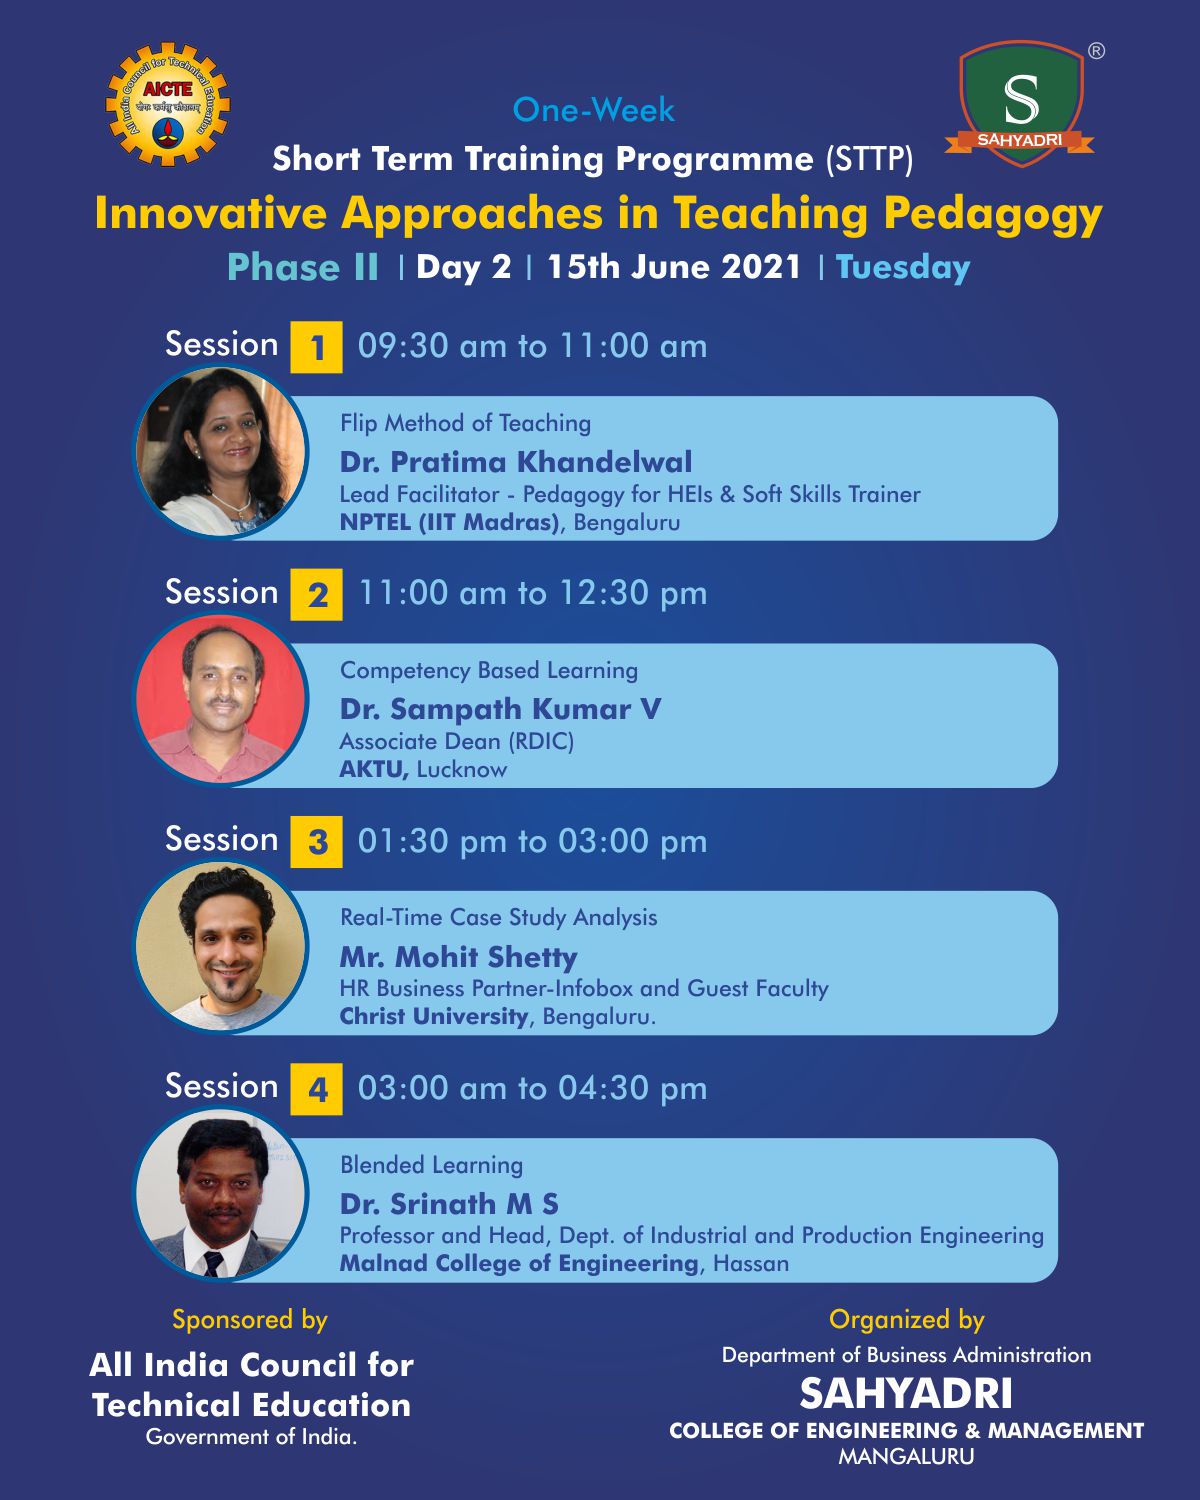 Phase II: AICTE Sponsored One-Week STTP on “Innovative Approaches in Teaching Pedagogy”